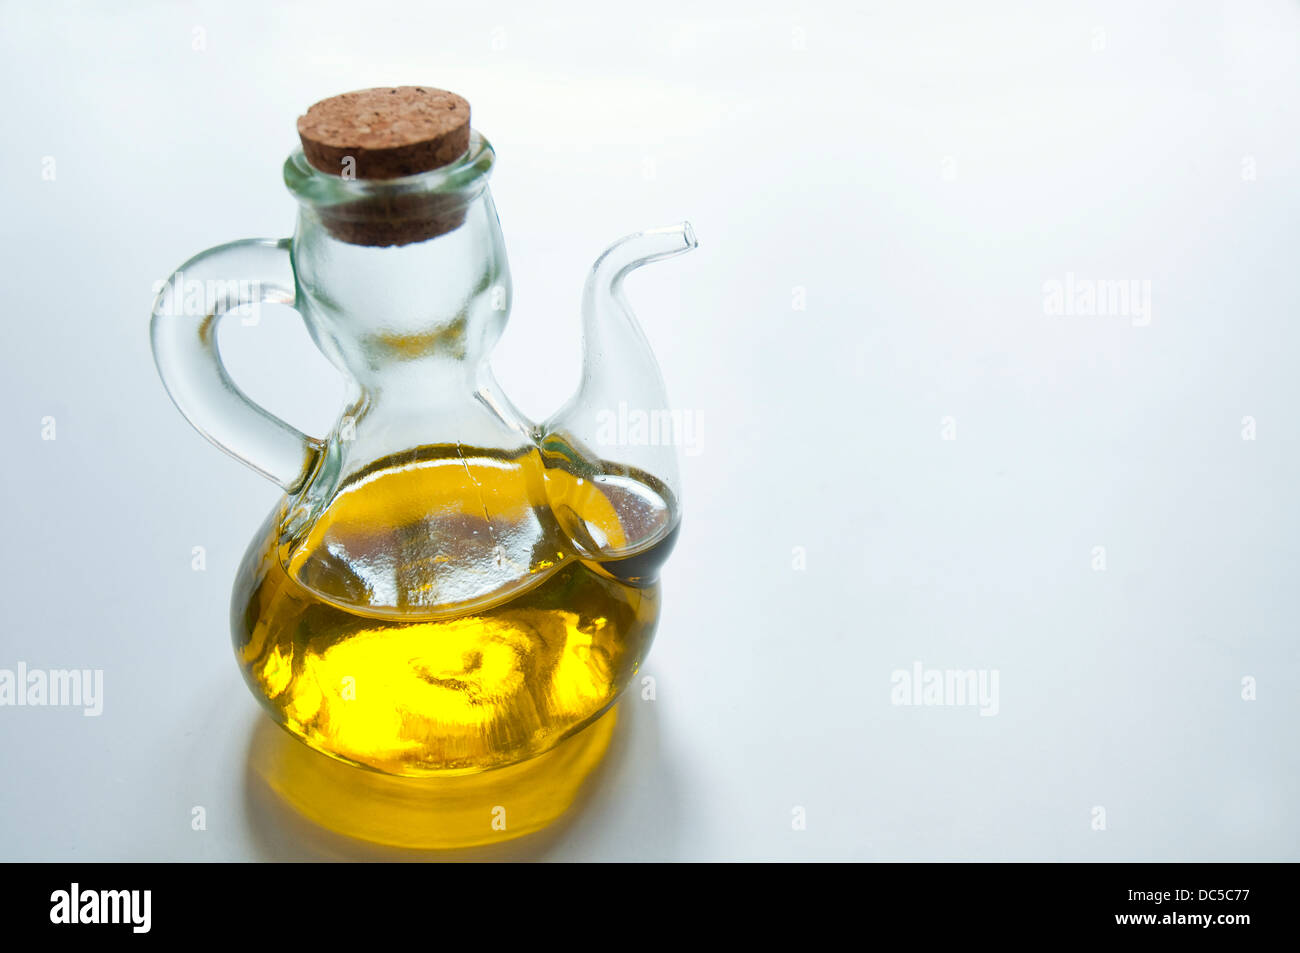 Oil bottle filled with extra virgin olive oil from Spain. Still life. Stock Photo